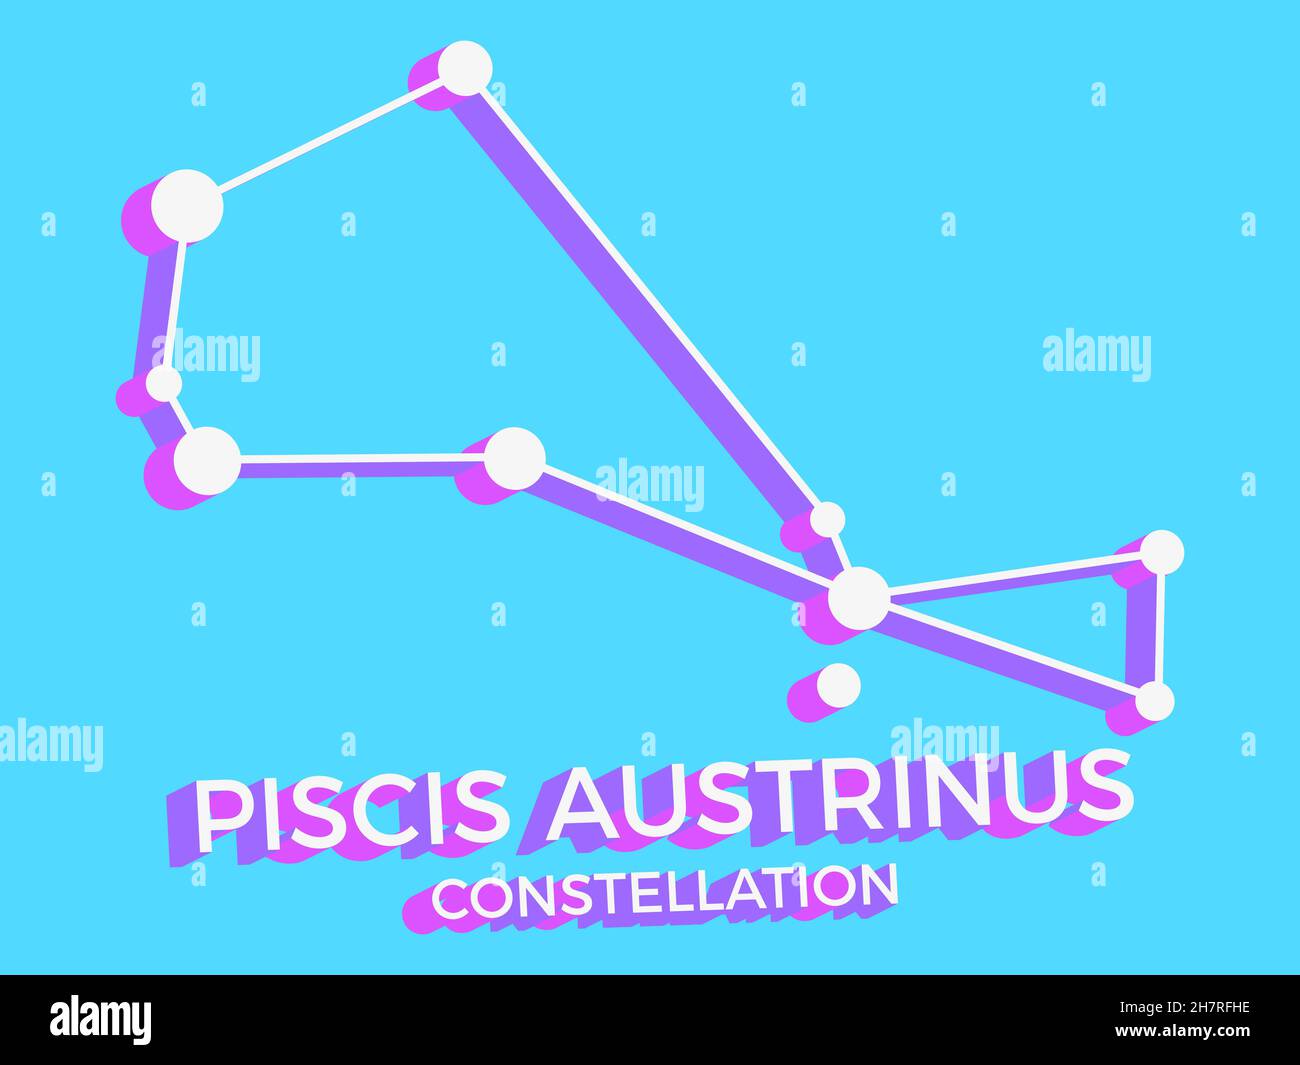 Piscis Austrinus constellation 3d symbol. Constellation icon in isometric style on blue background. Cluster of stars and galaxies. Vector illustration Stock Vector